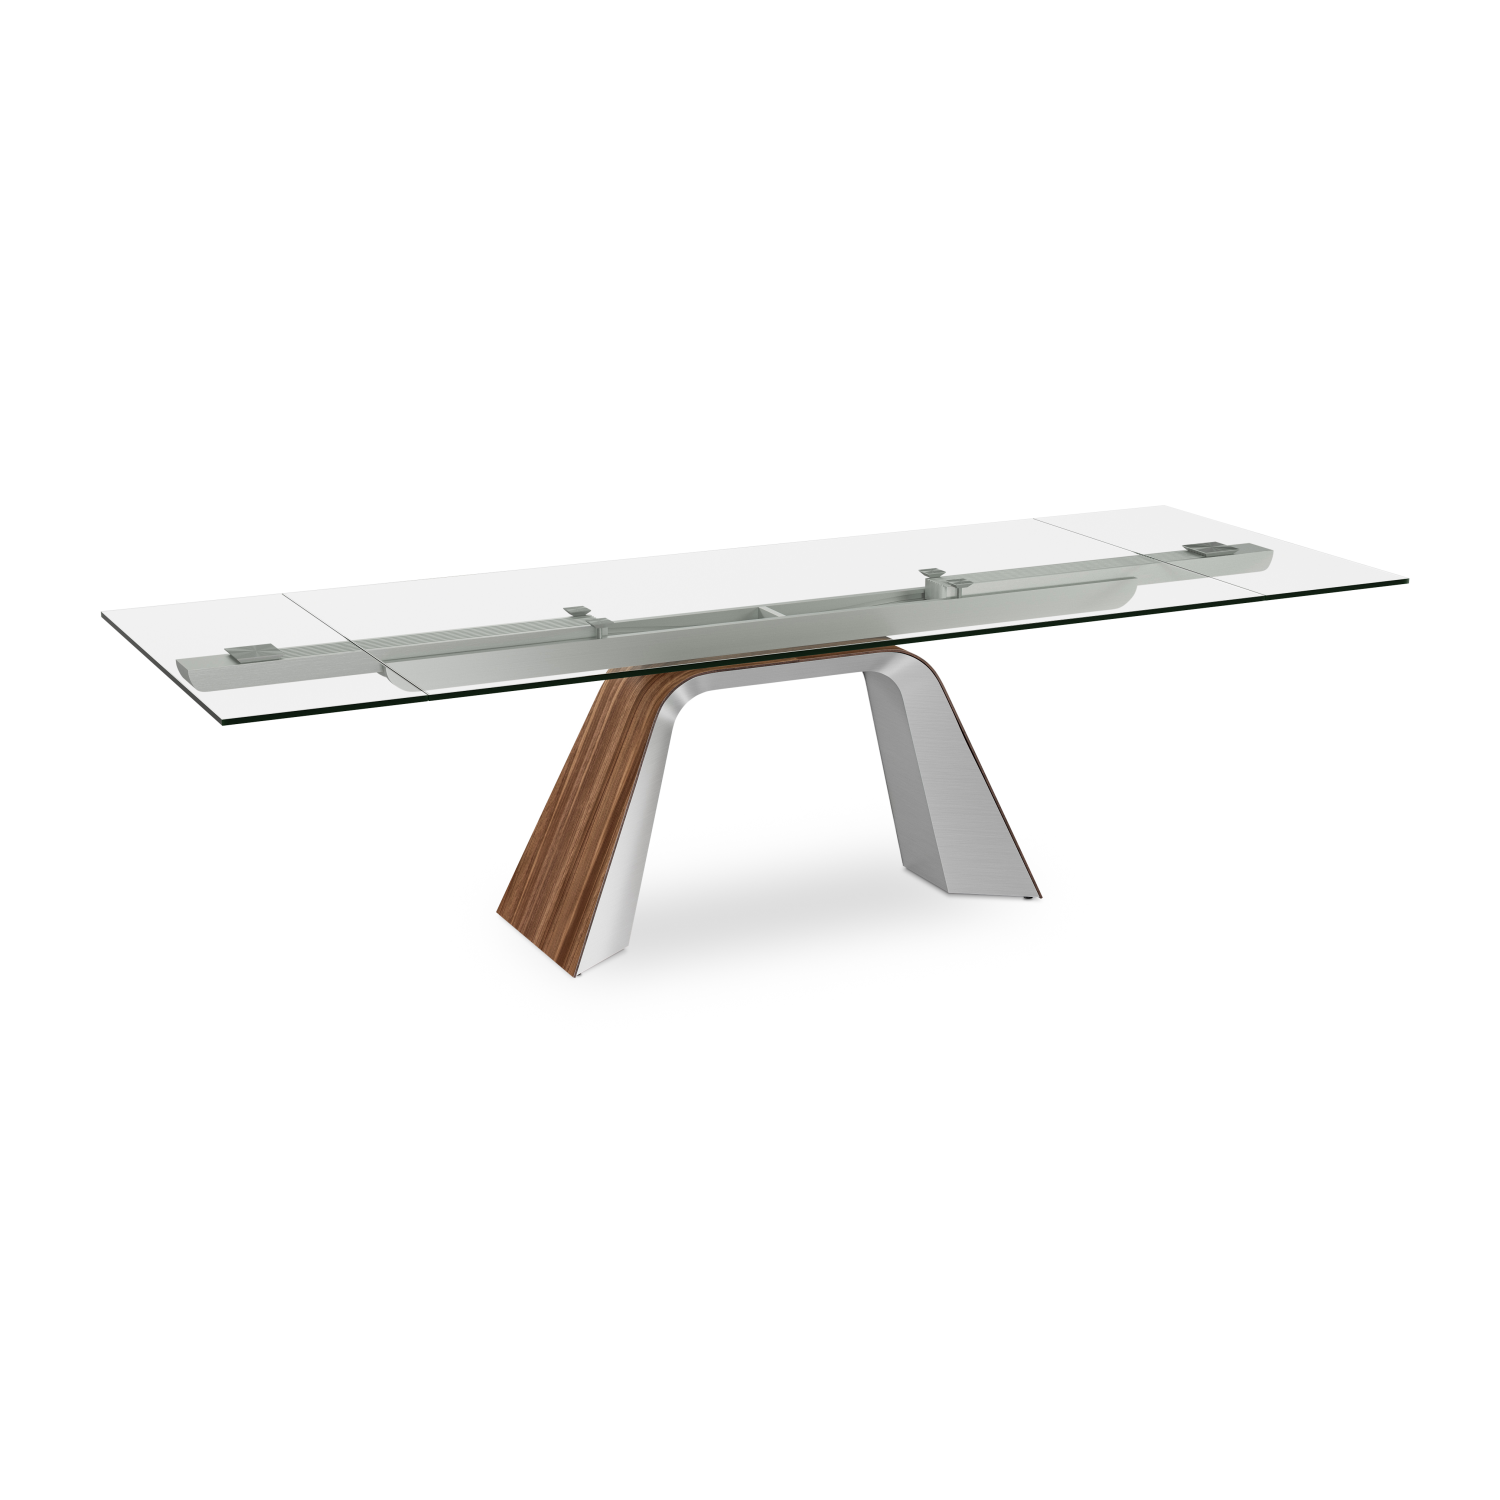 Hyper Dining Table Image with Table Extended